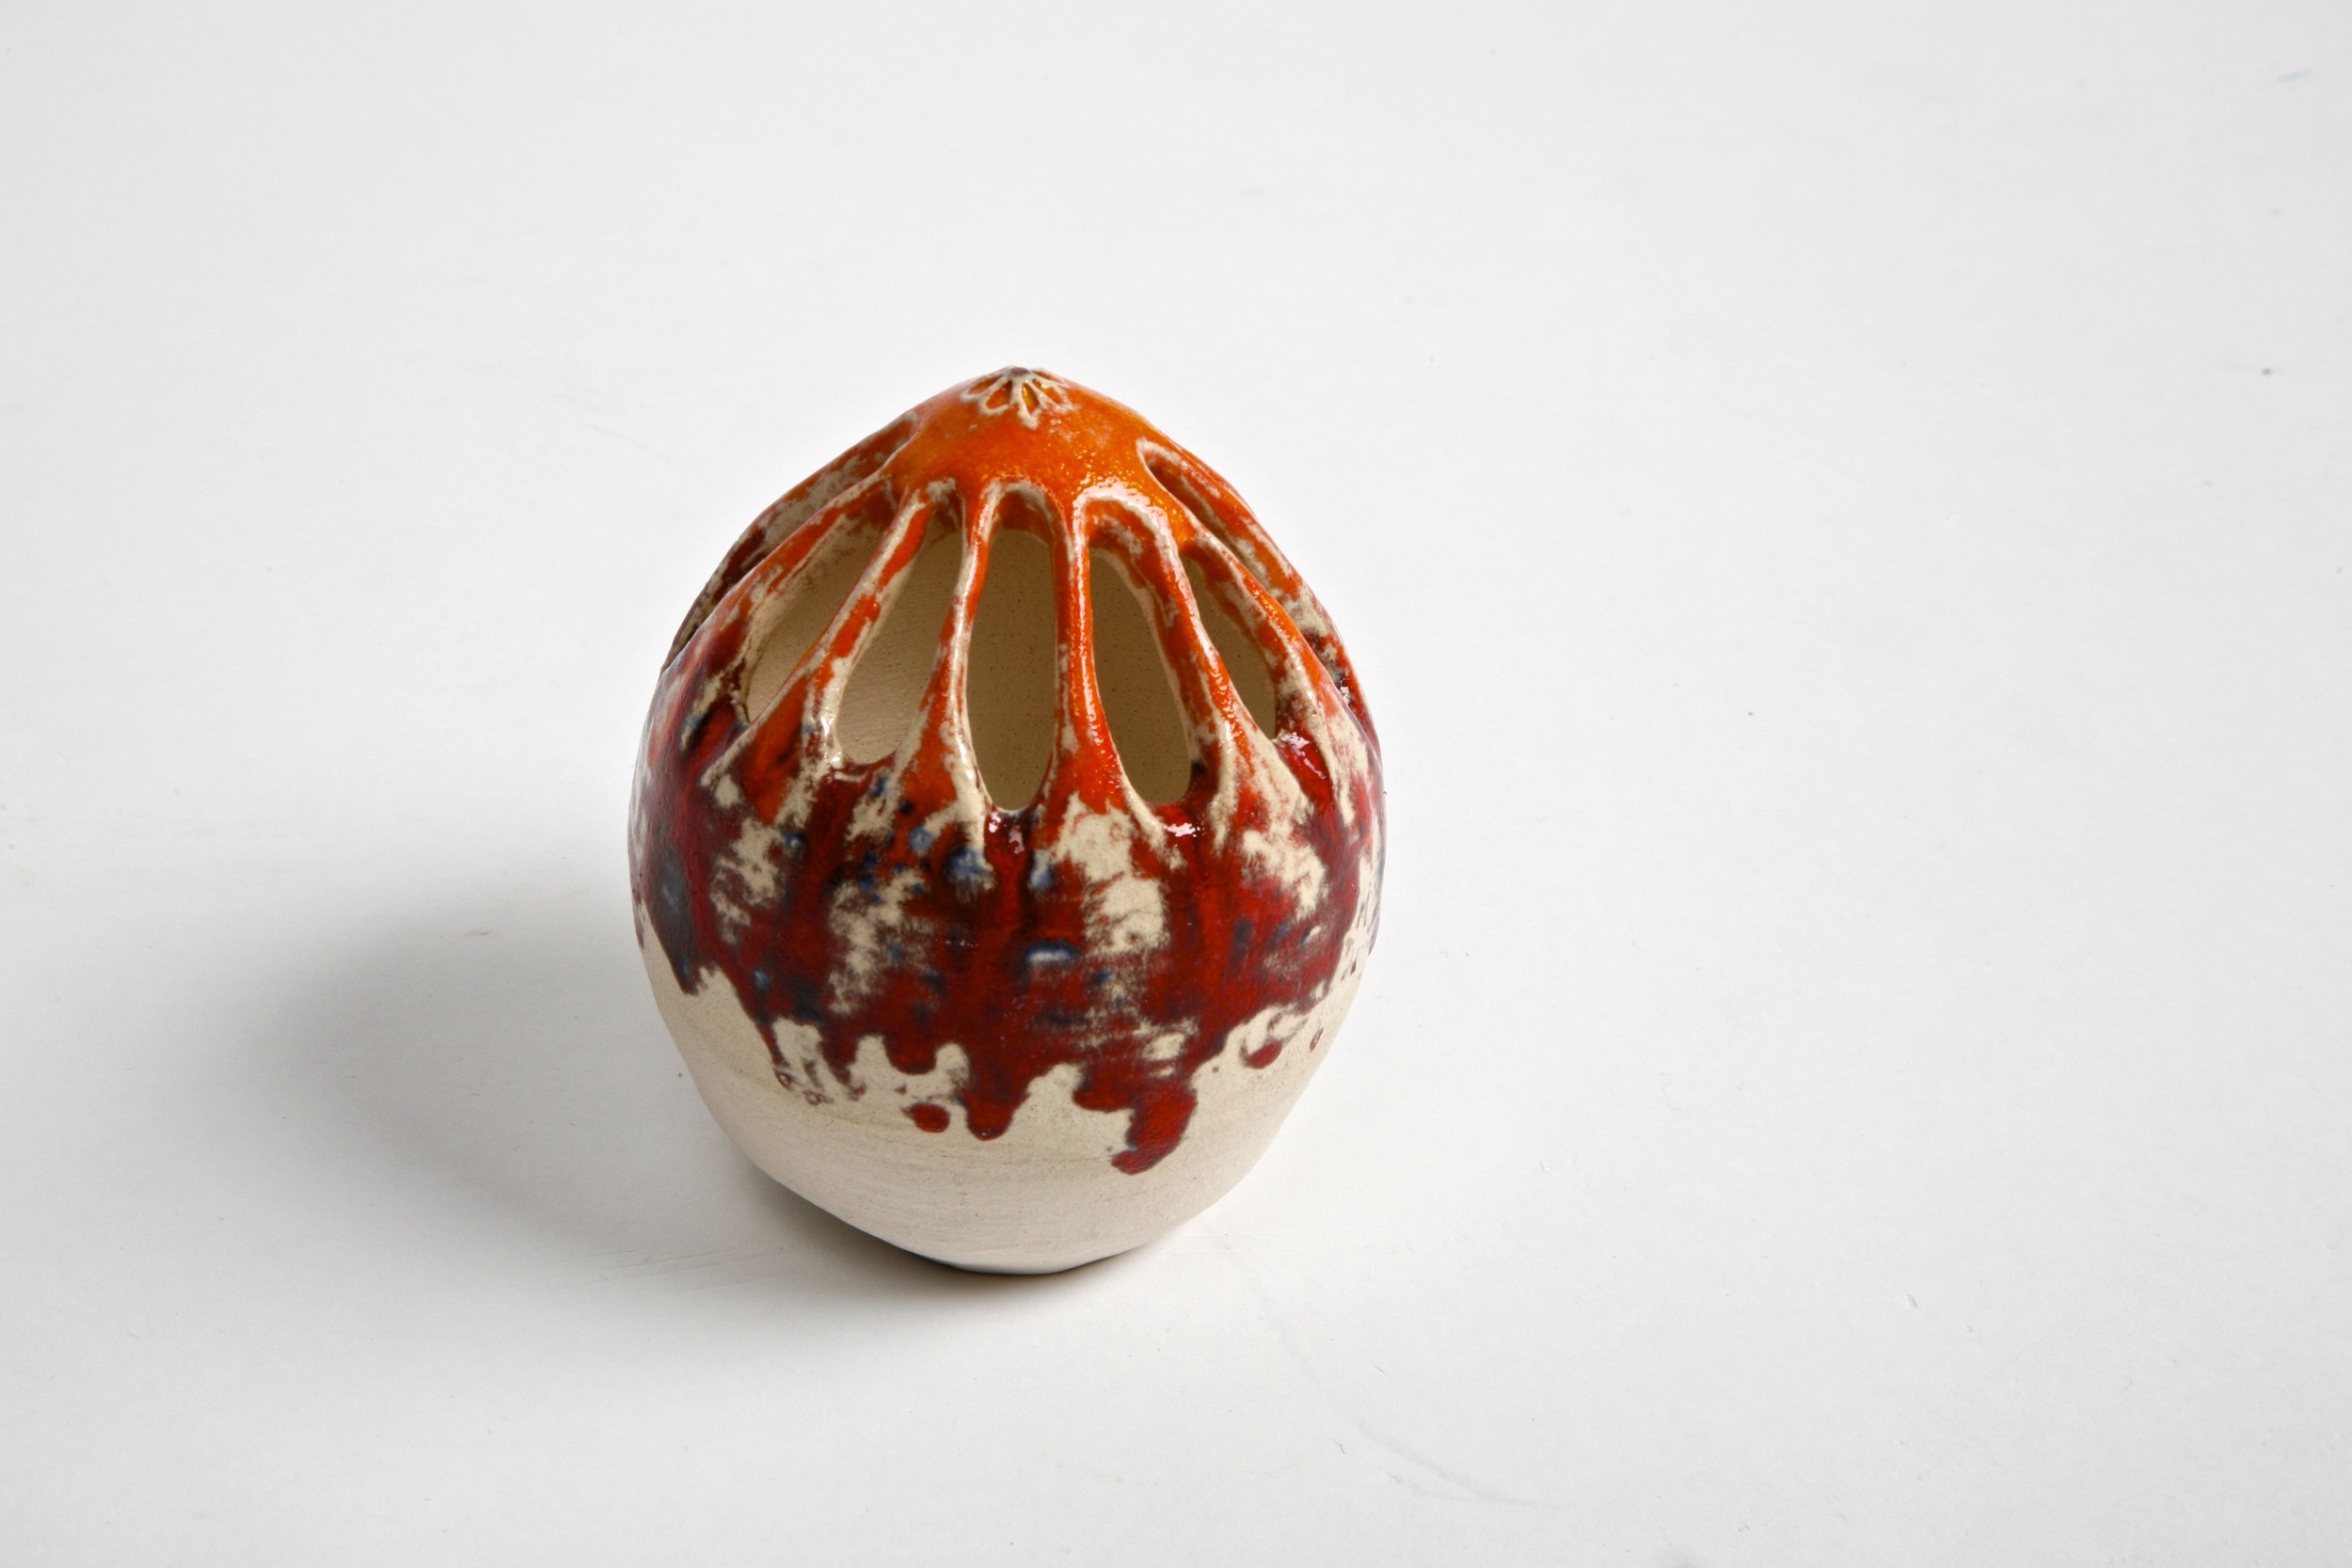 Red and orange colored ceramic egg like sculpture at NCAD Dublin IR Shannon May Mackenzie